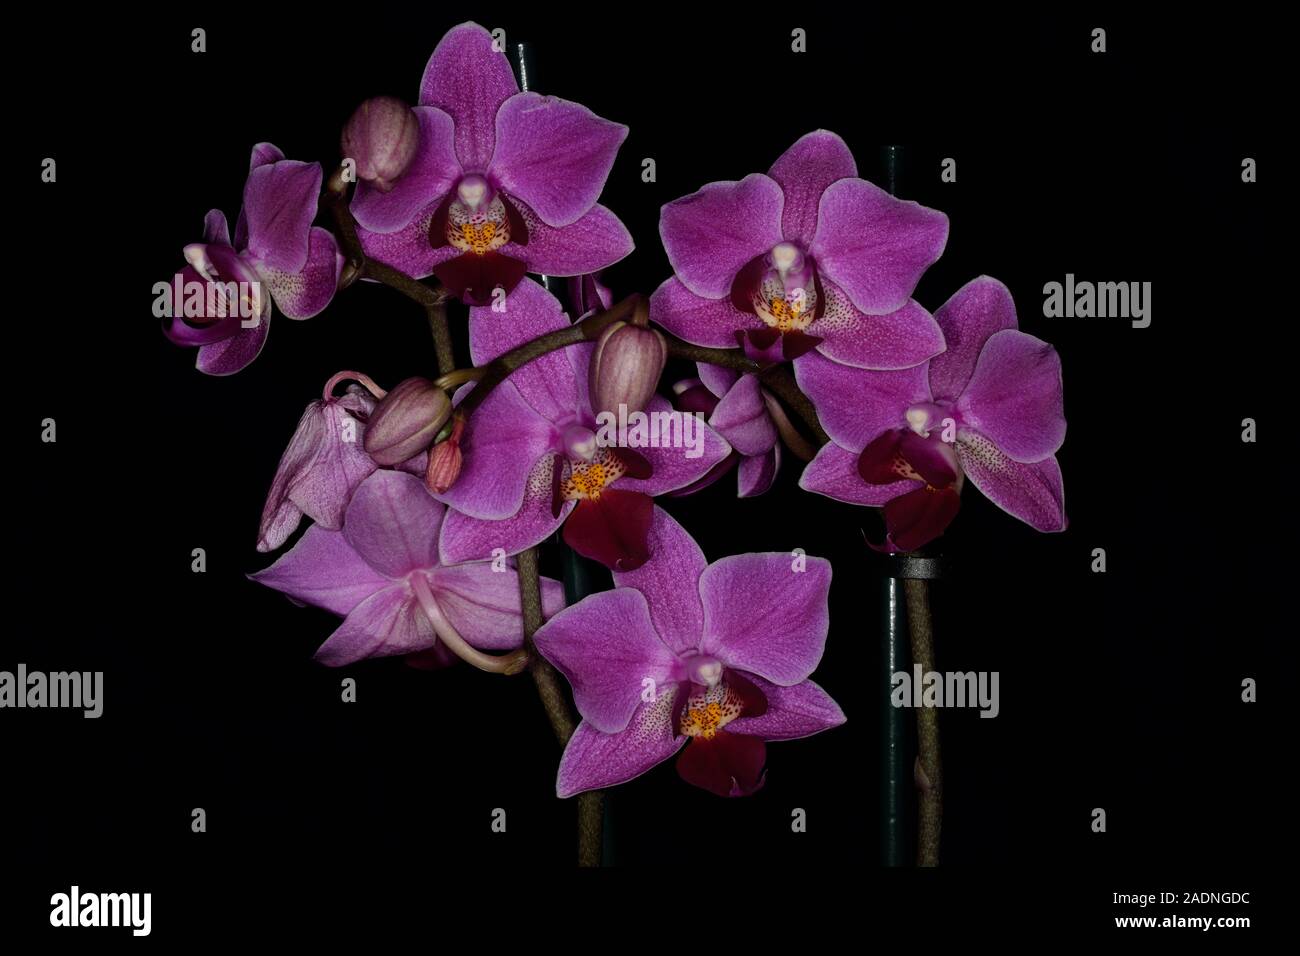 Orchid or Orchidaceous. Closeup of purple flowers on a dark background. Stock Photo